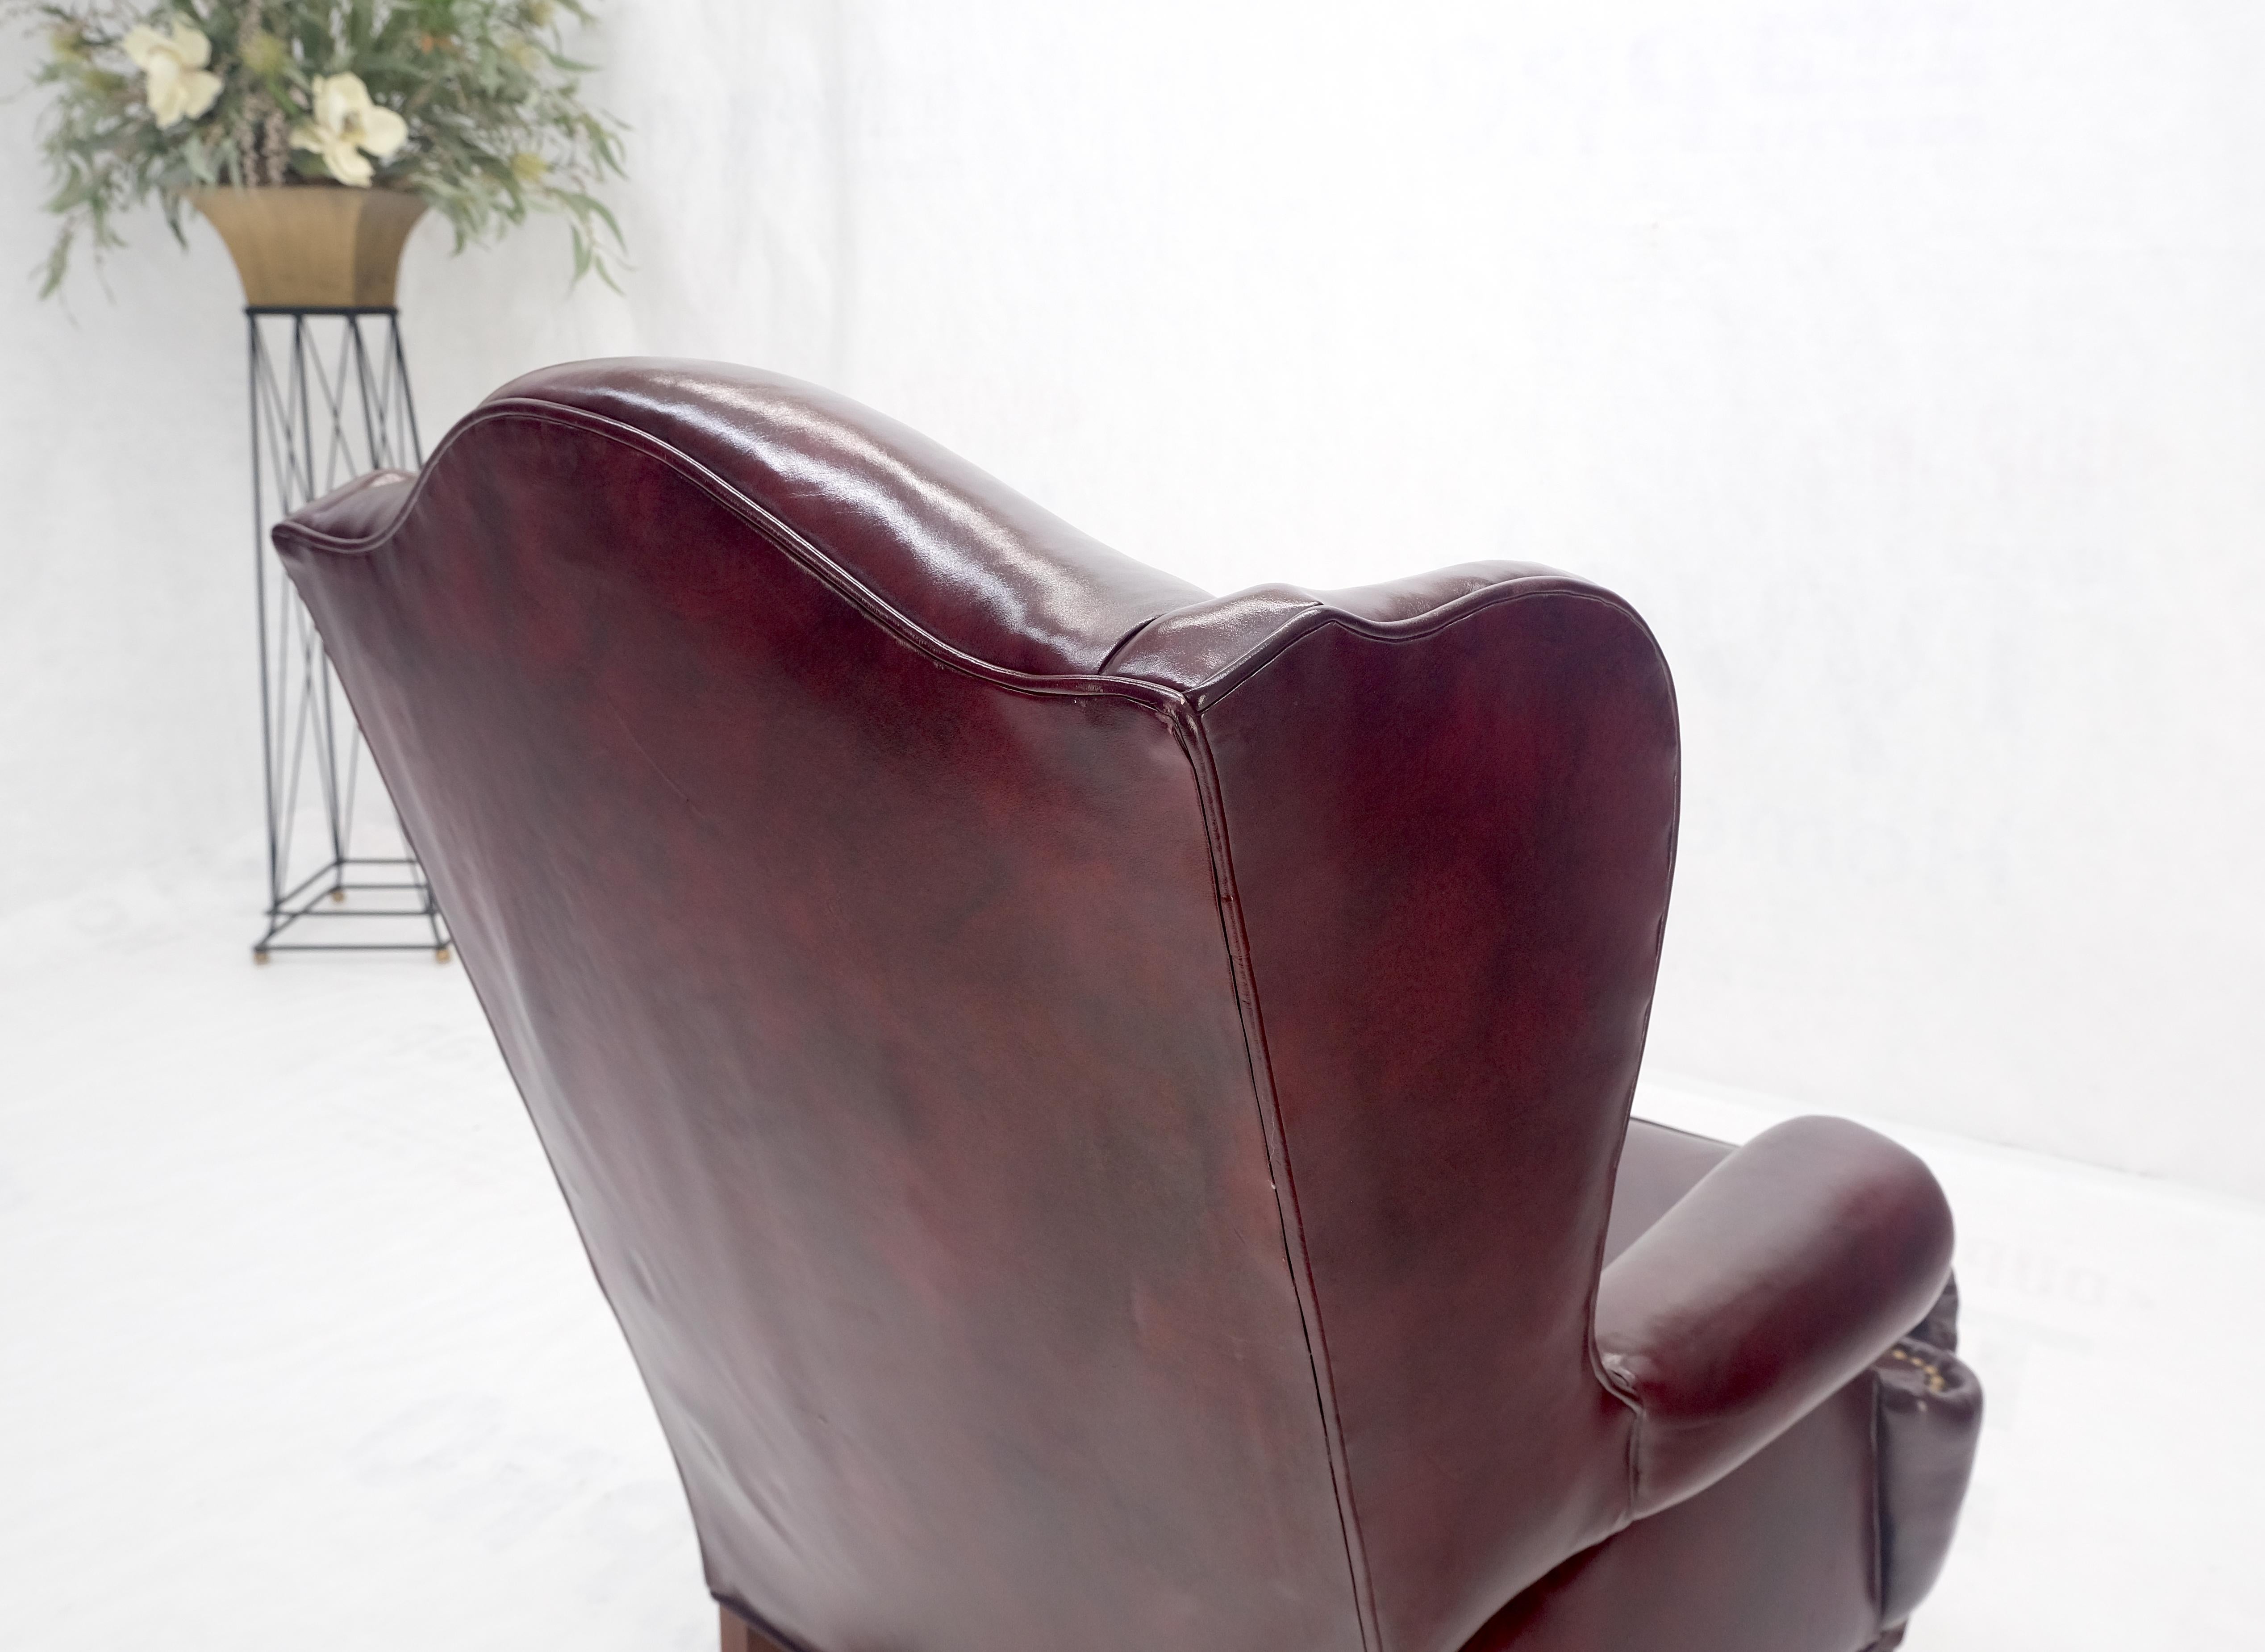 Kindel Burgundy Leather Upholstery Carved Mahogany Legs Wingback Chair & Ottoman For Sale 11